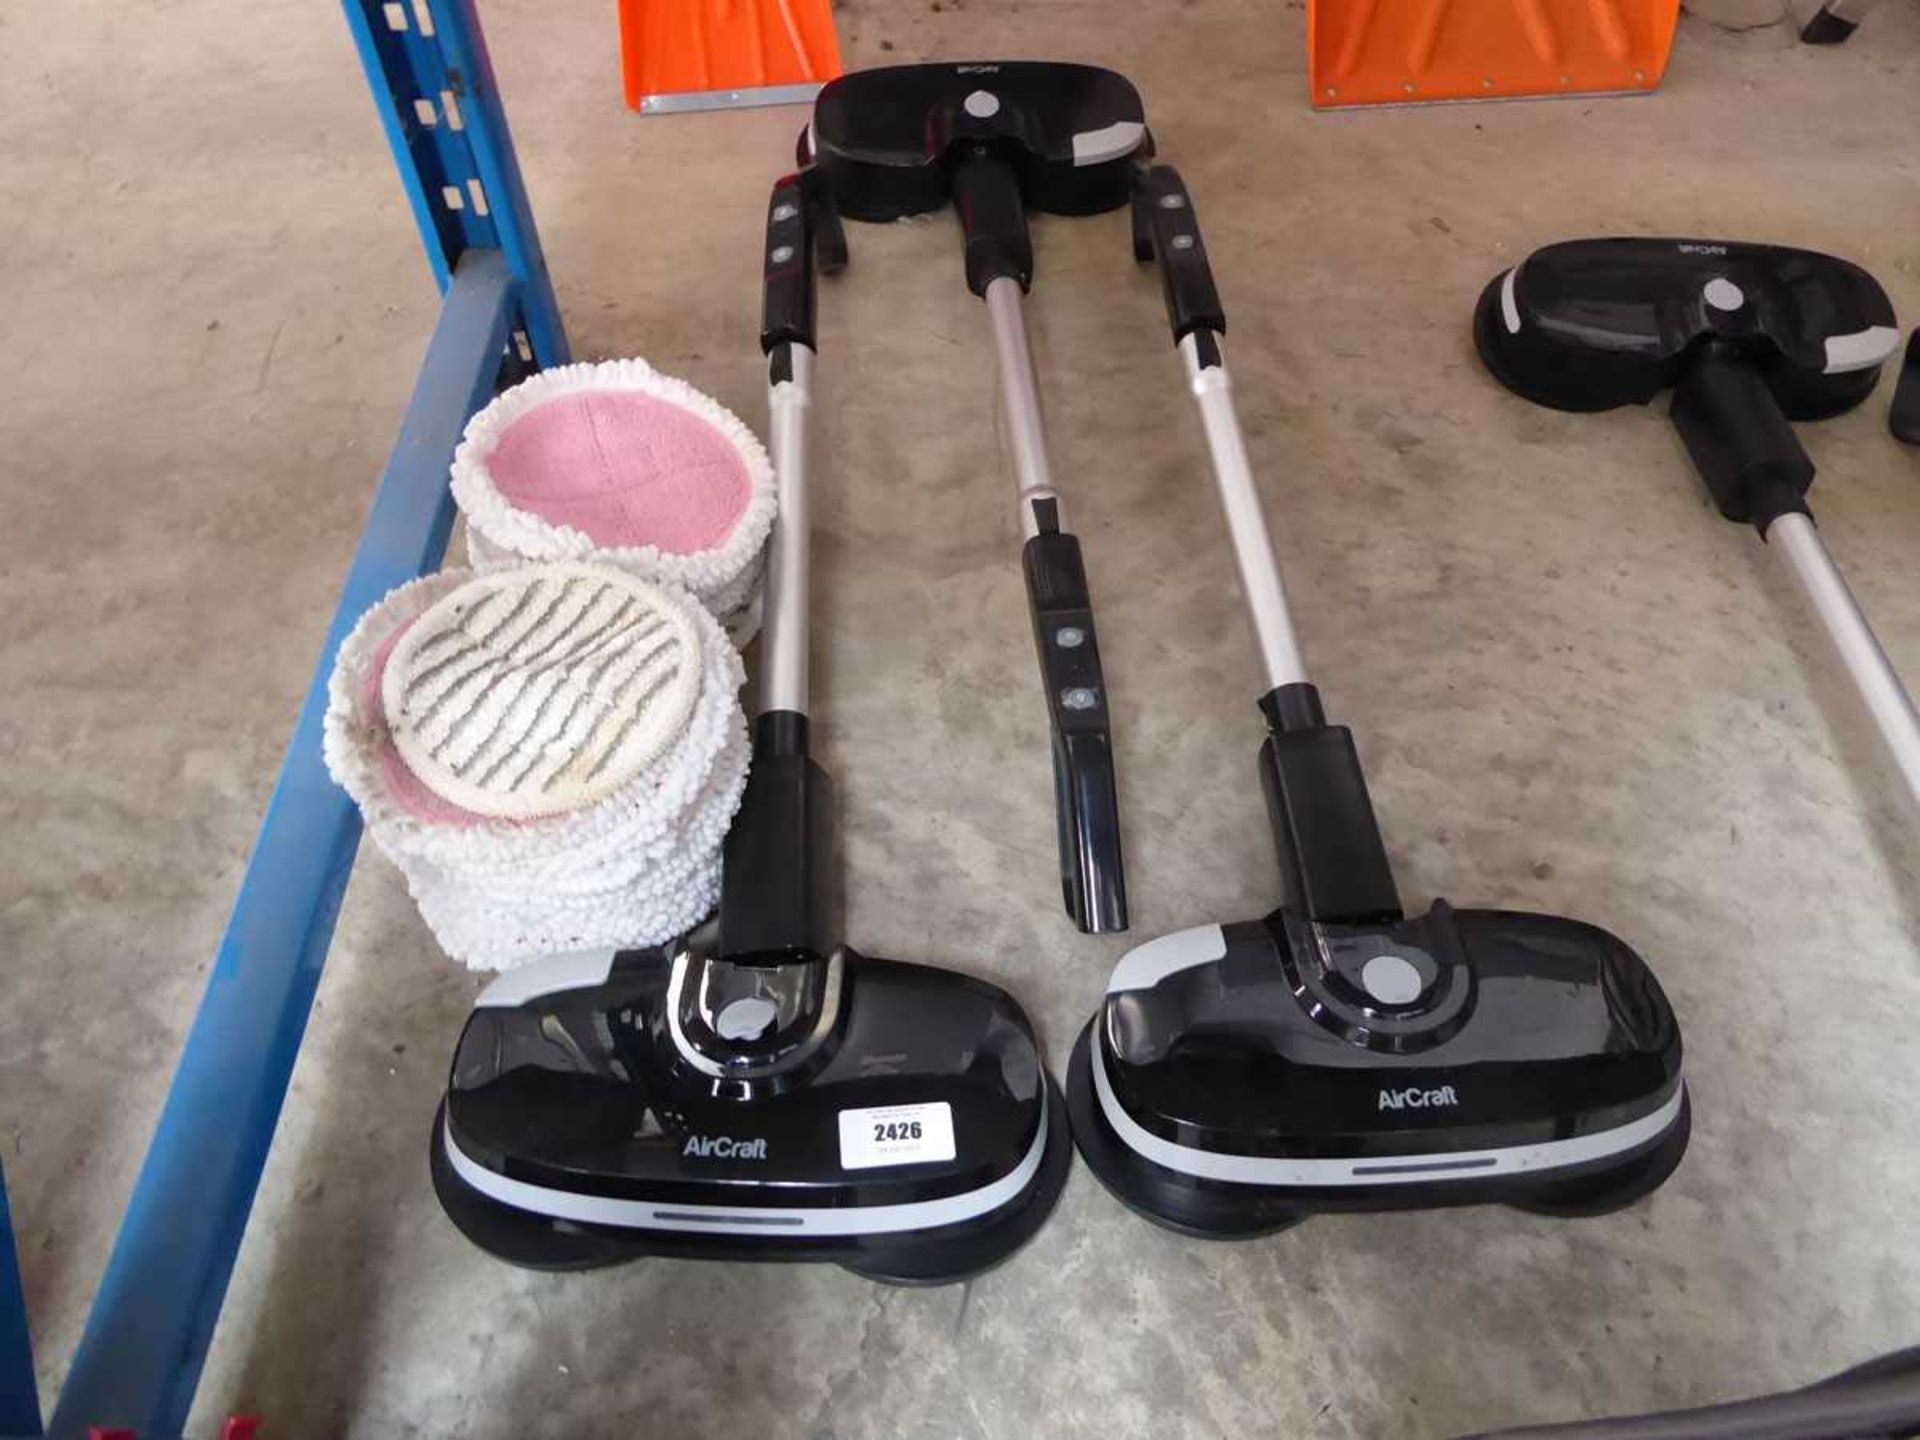 +VAT 3 Aircraft hard floor cordless floor cleaners with quantity of associated floor cleaning